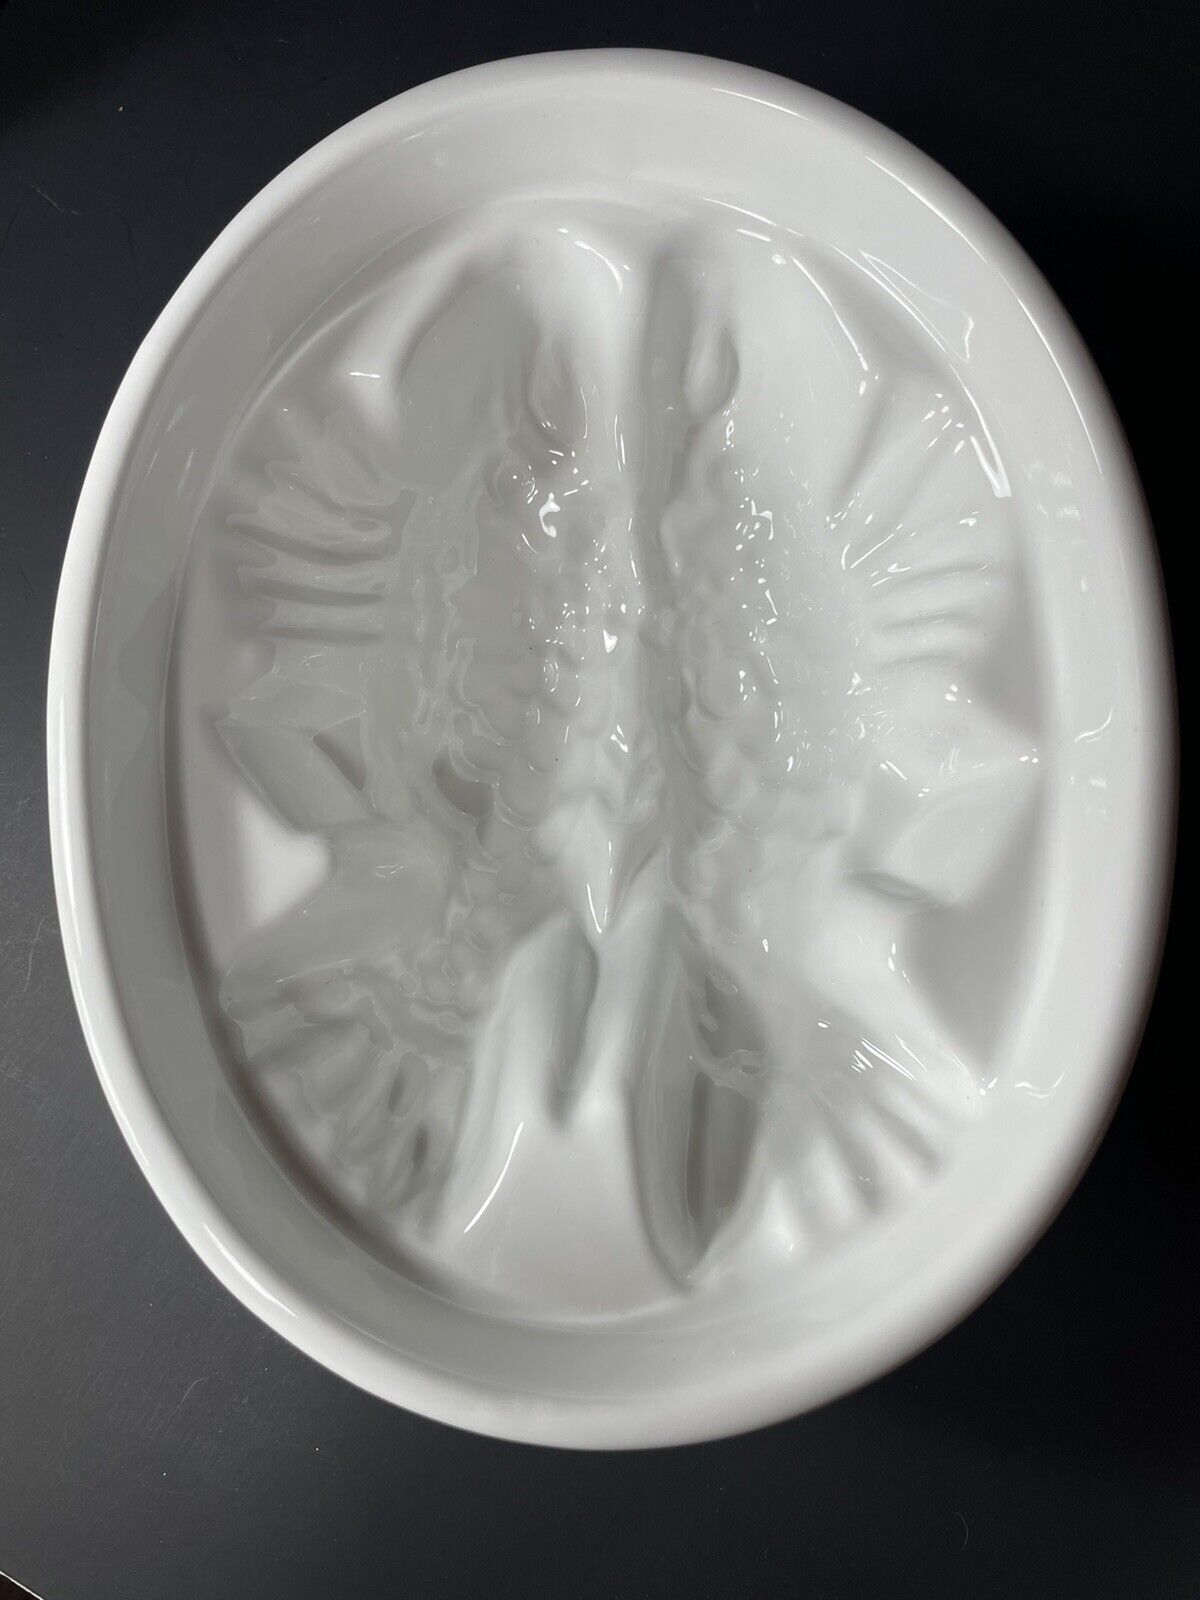 White Ceramic Fish Form Food English Pudding Jello Jelly Mold Made In England